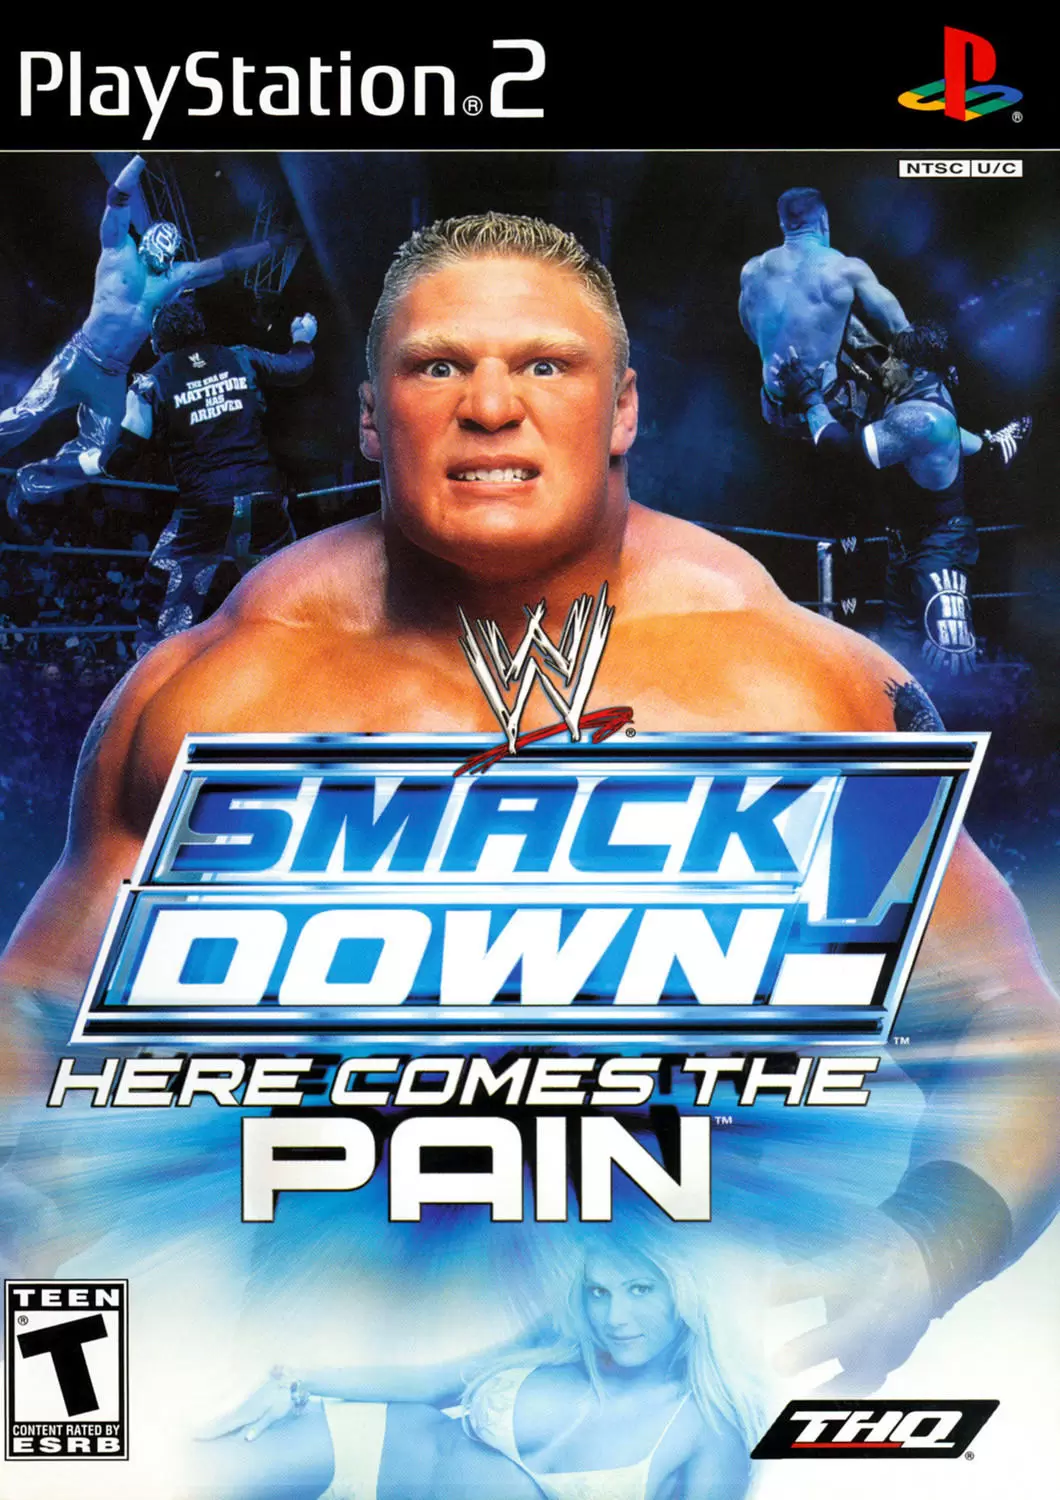 PS2 Games - WWE Smackdown! Here Comes the Pain